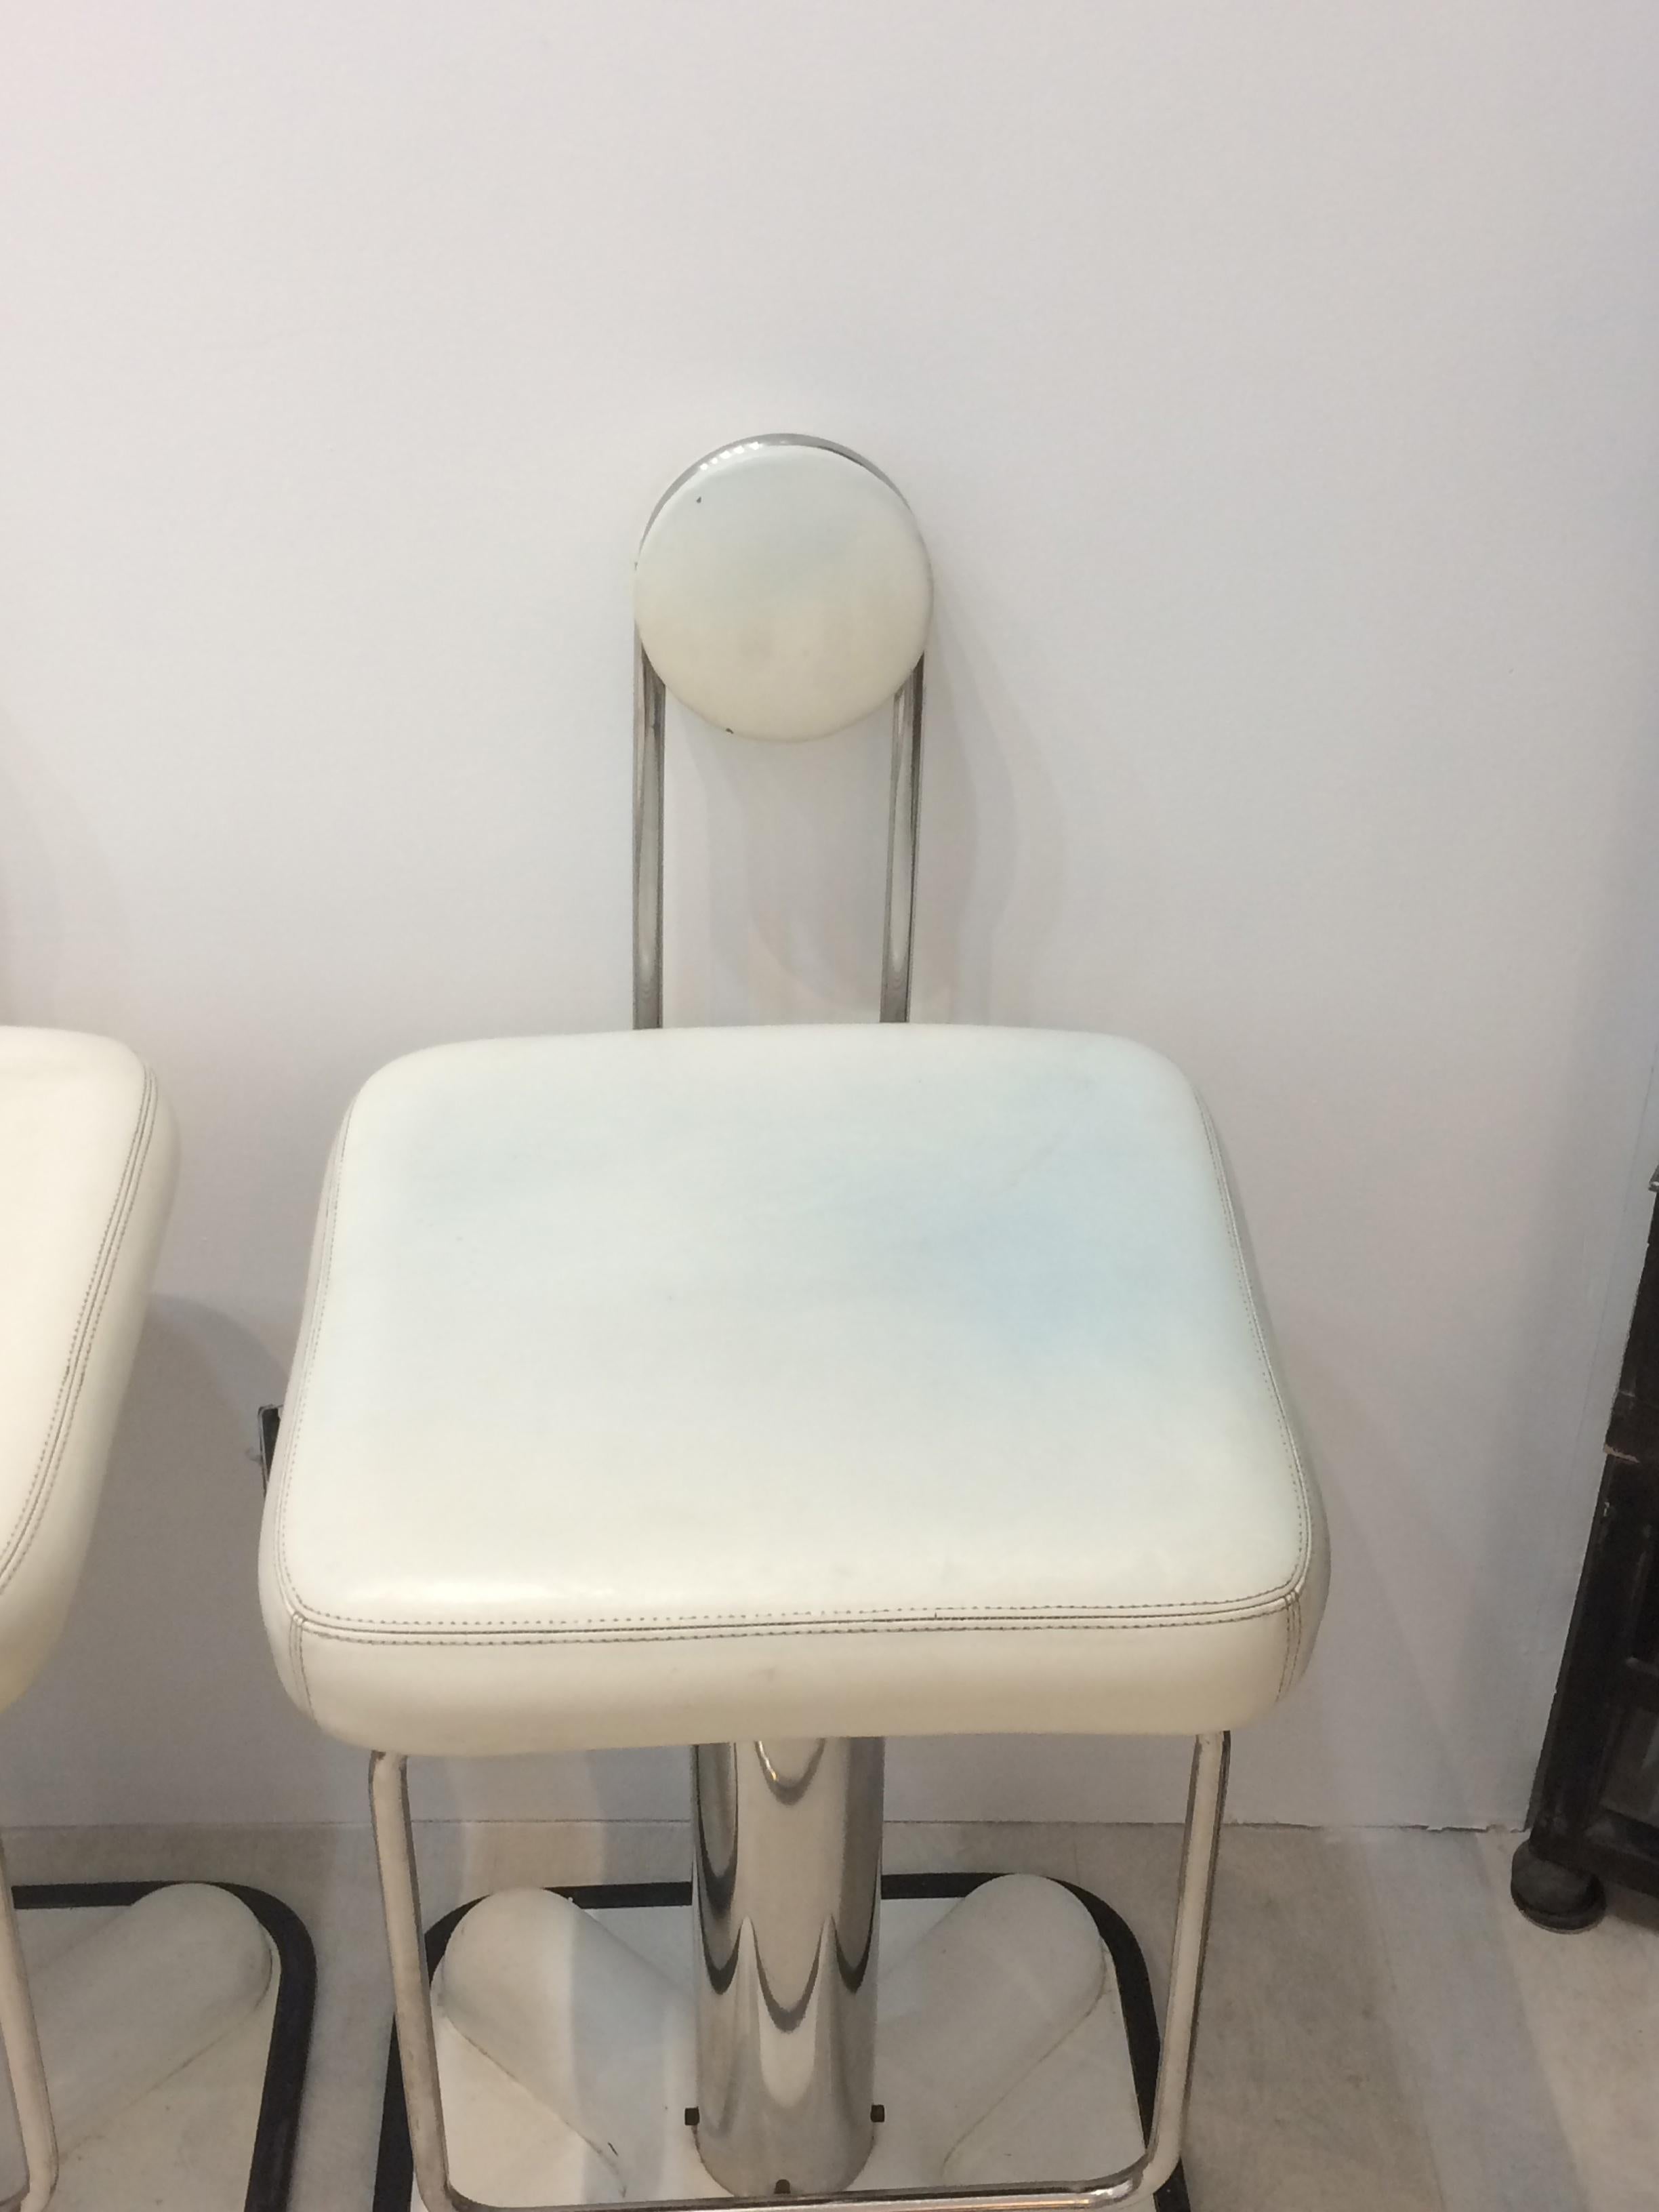 Birillo barstools were designed in 1971 by Joe Colombo for Zanotta. White upholstery on chromed metal base with a white lacquered plastic foot. An award winning design by Joe Colombo one of the premier 1960s furniture designers.